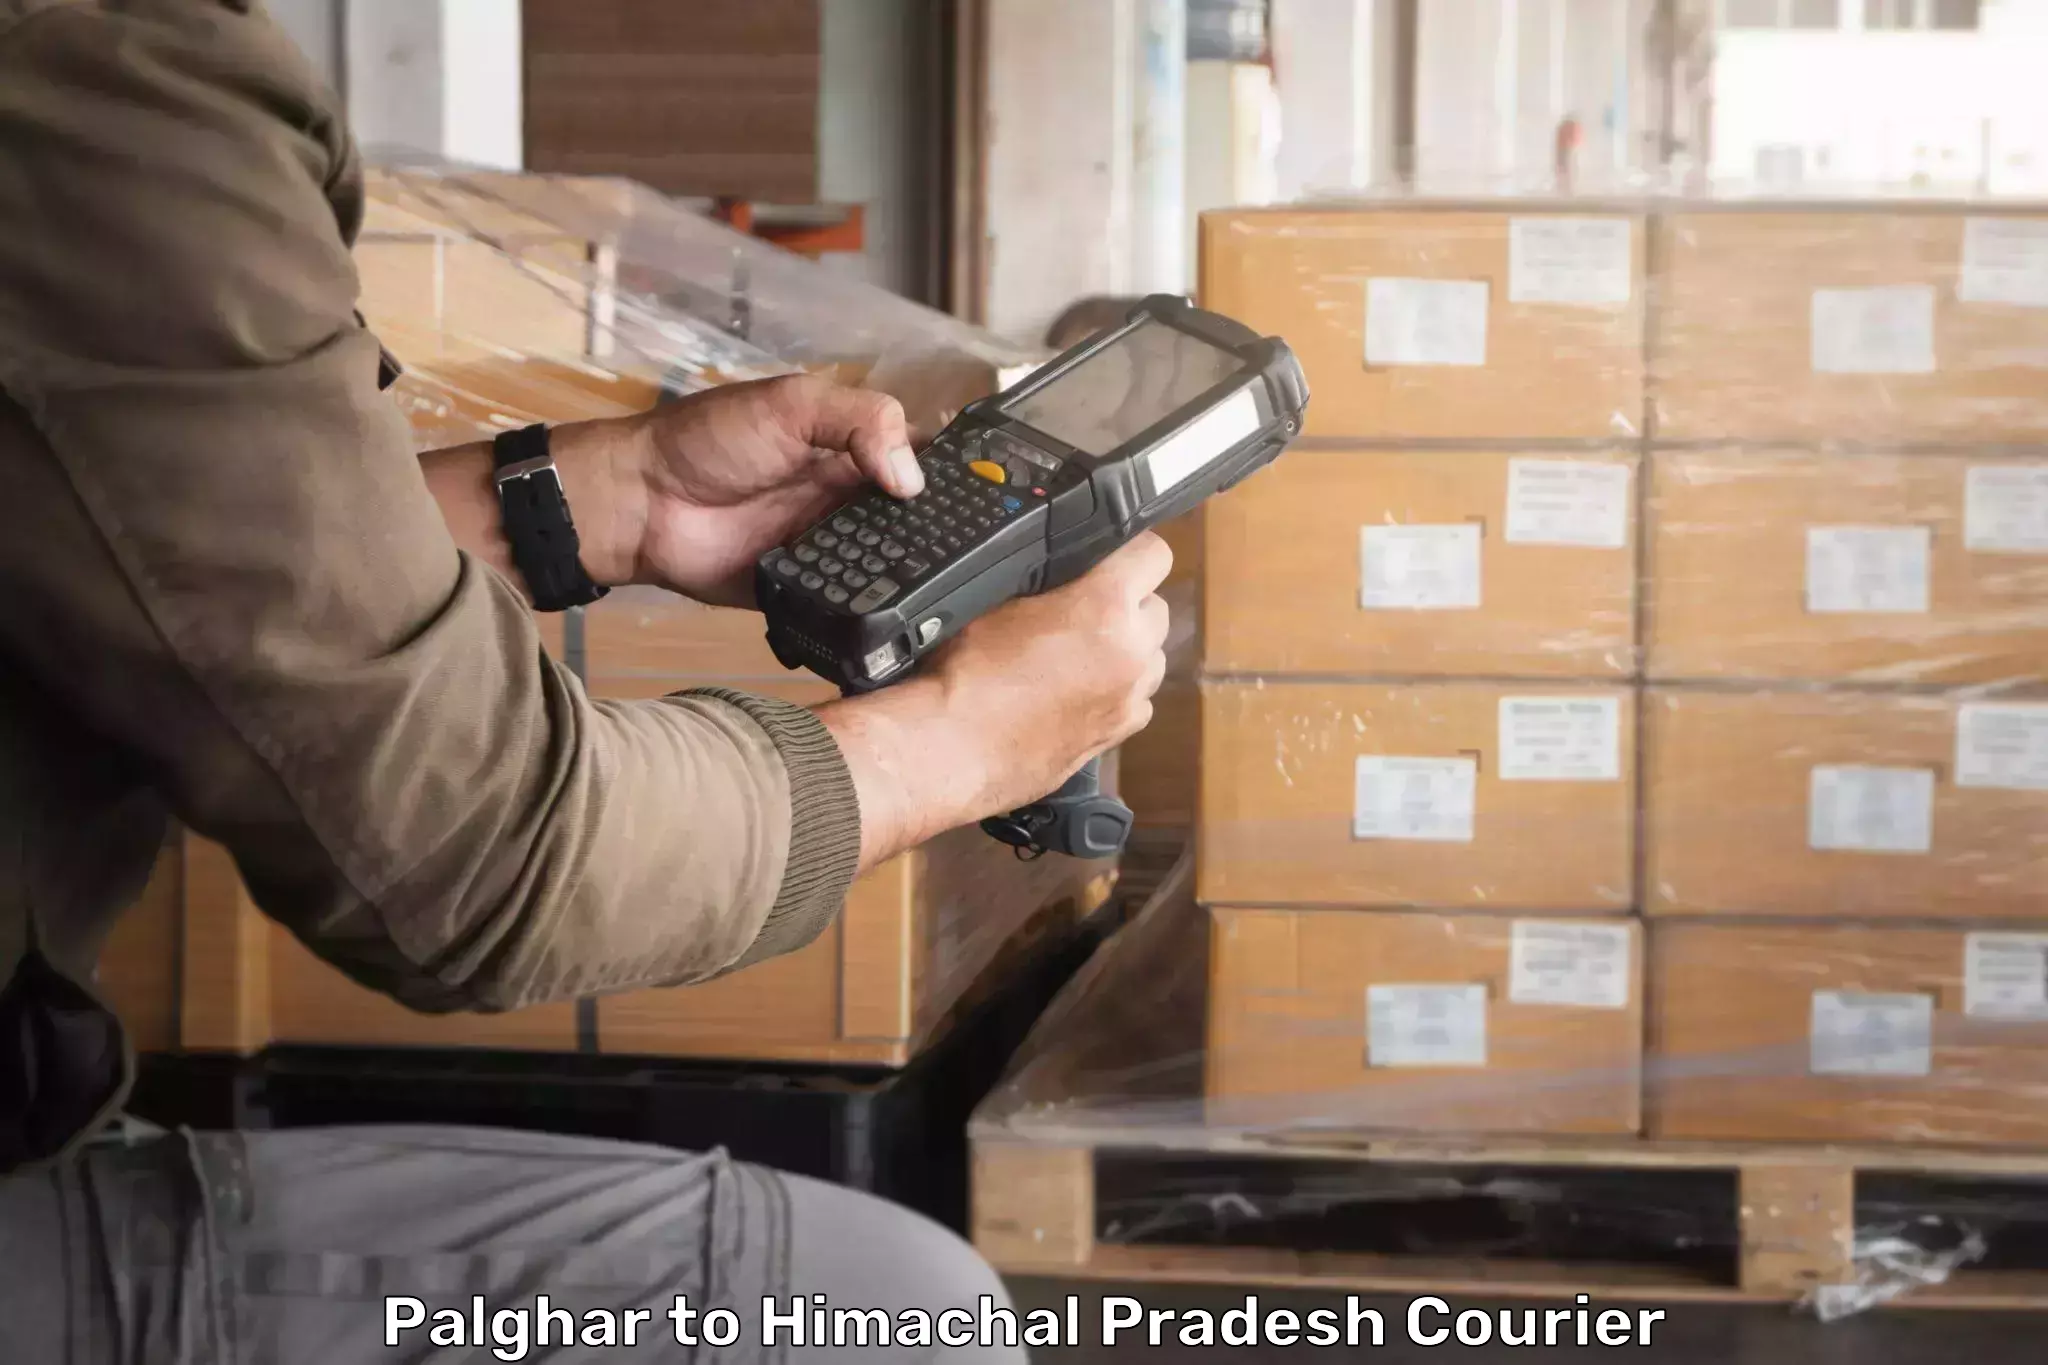 Sustainable courier practices Palghar to Chintpurni